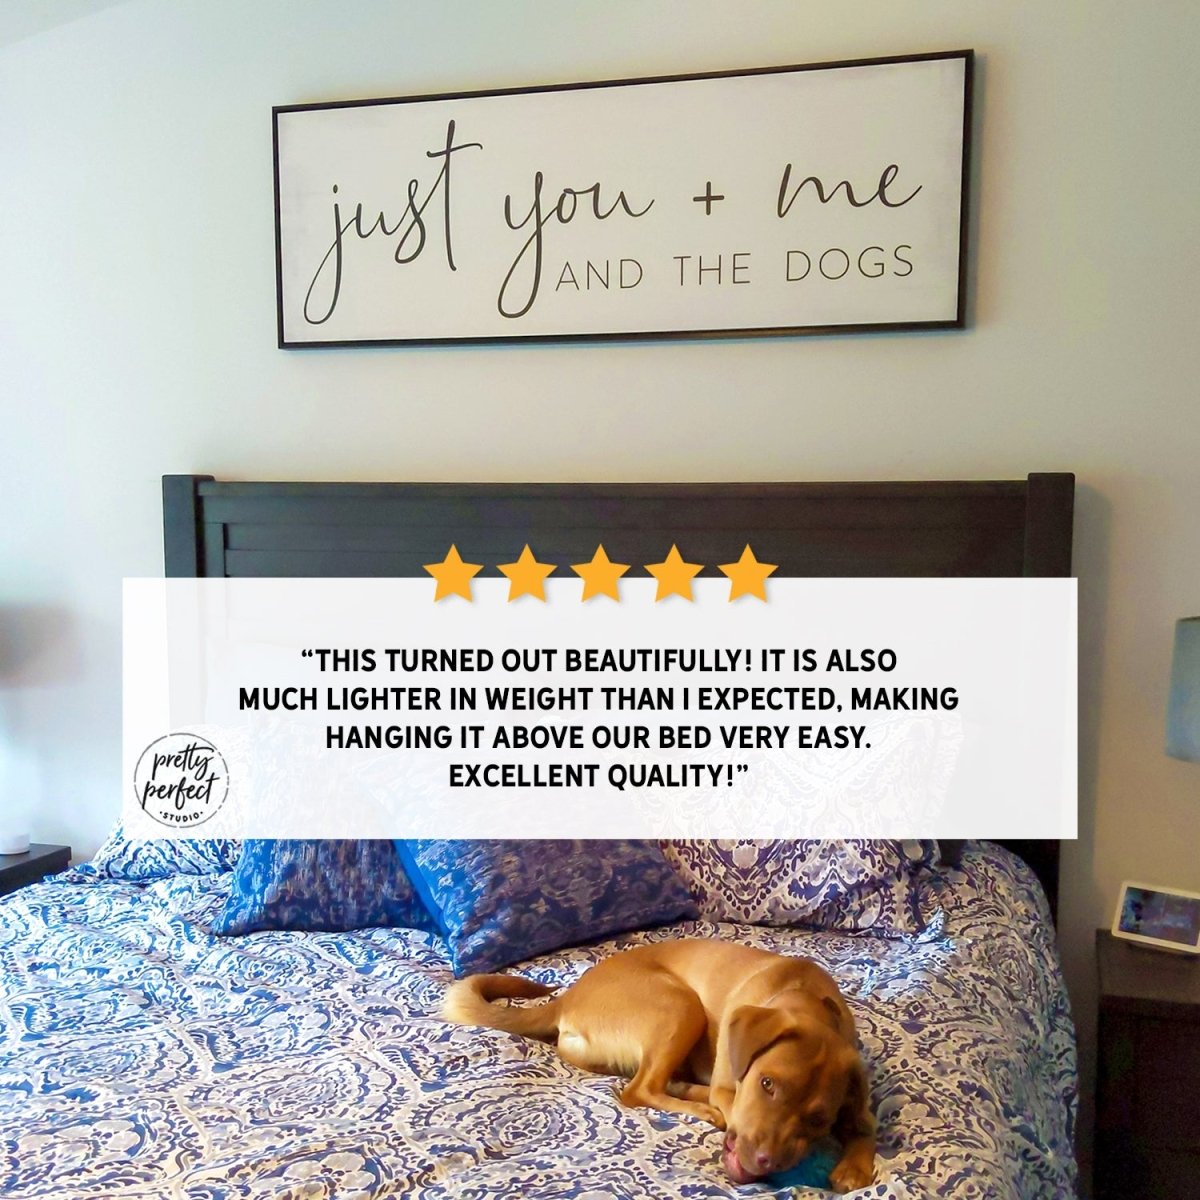 Customer product review for just you me and the dogs by Pretty Perfect Studio